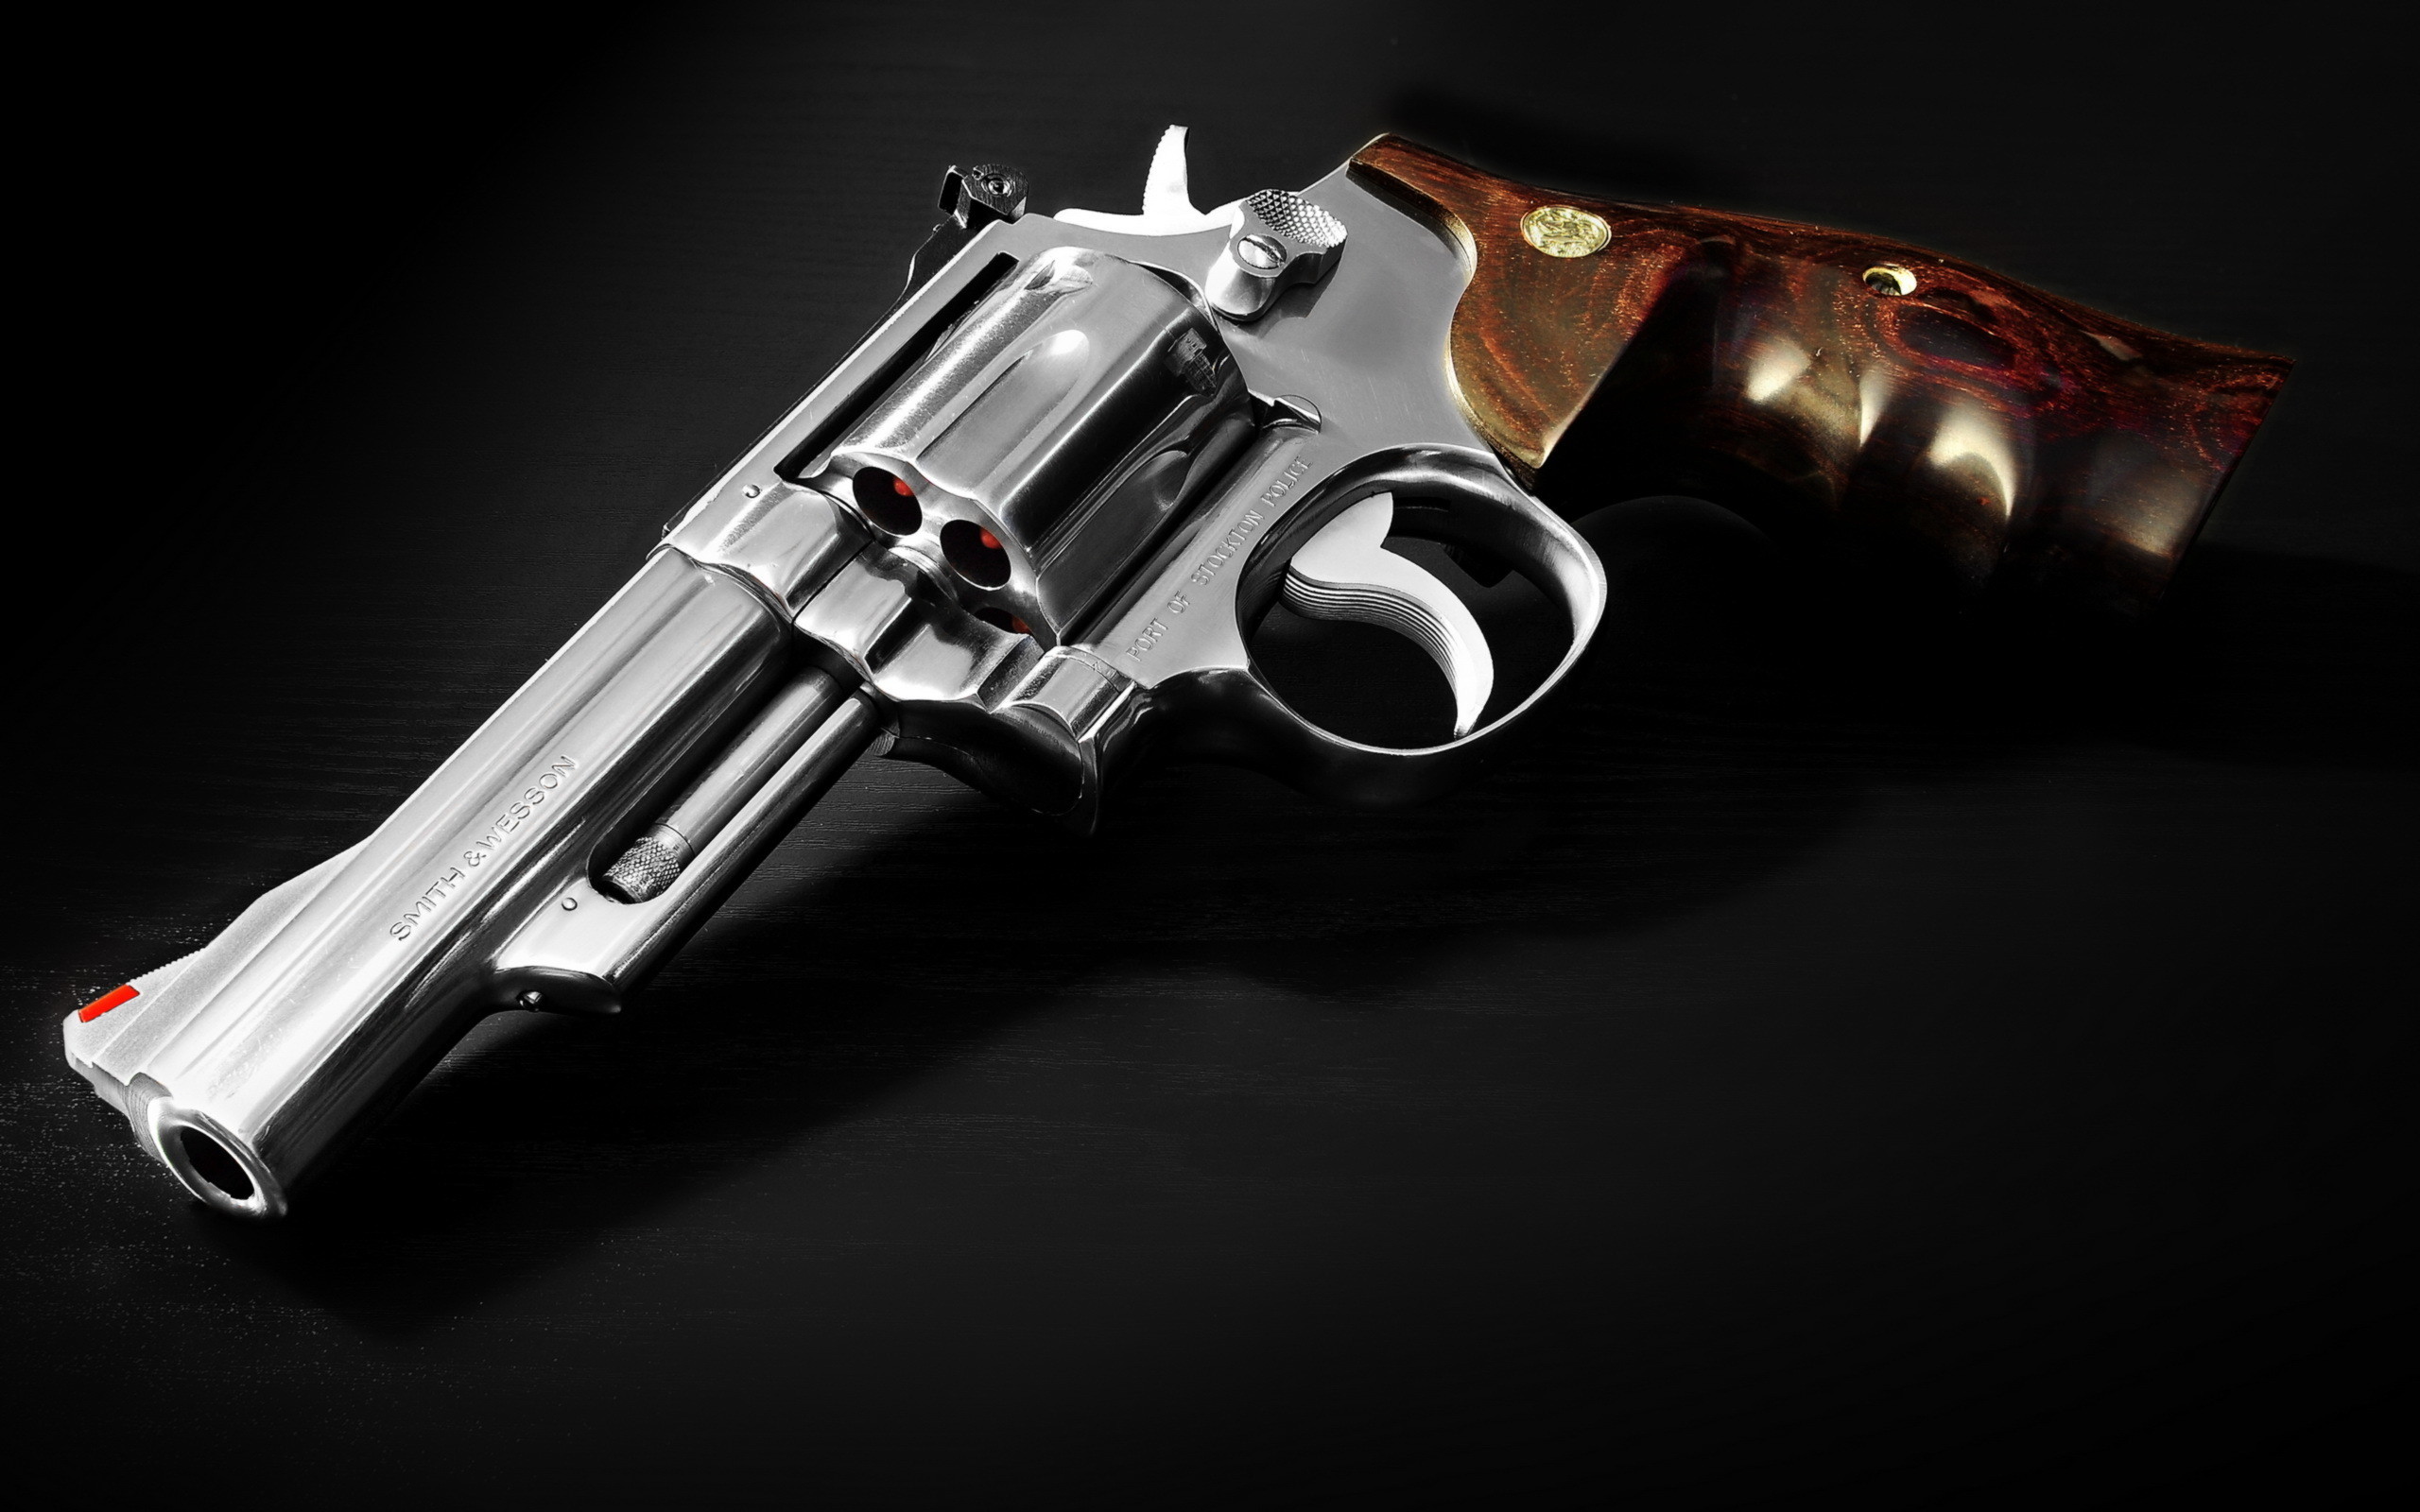 2560x1600 Smith and Wesson 66-1 Computer Wallpapers, Desktop Backgrounds .